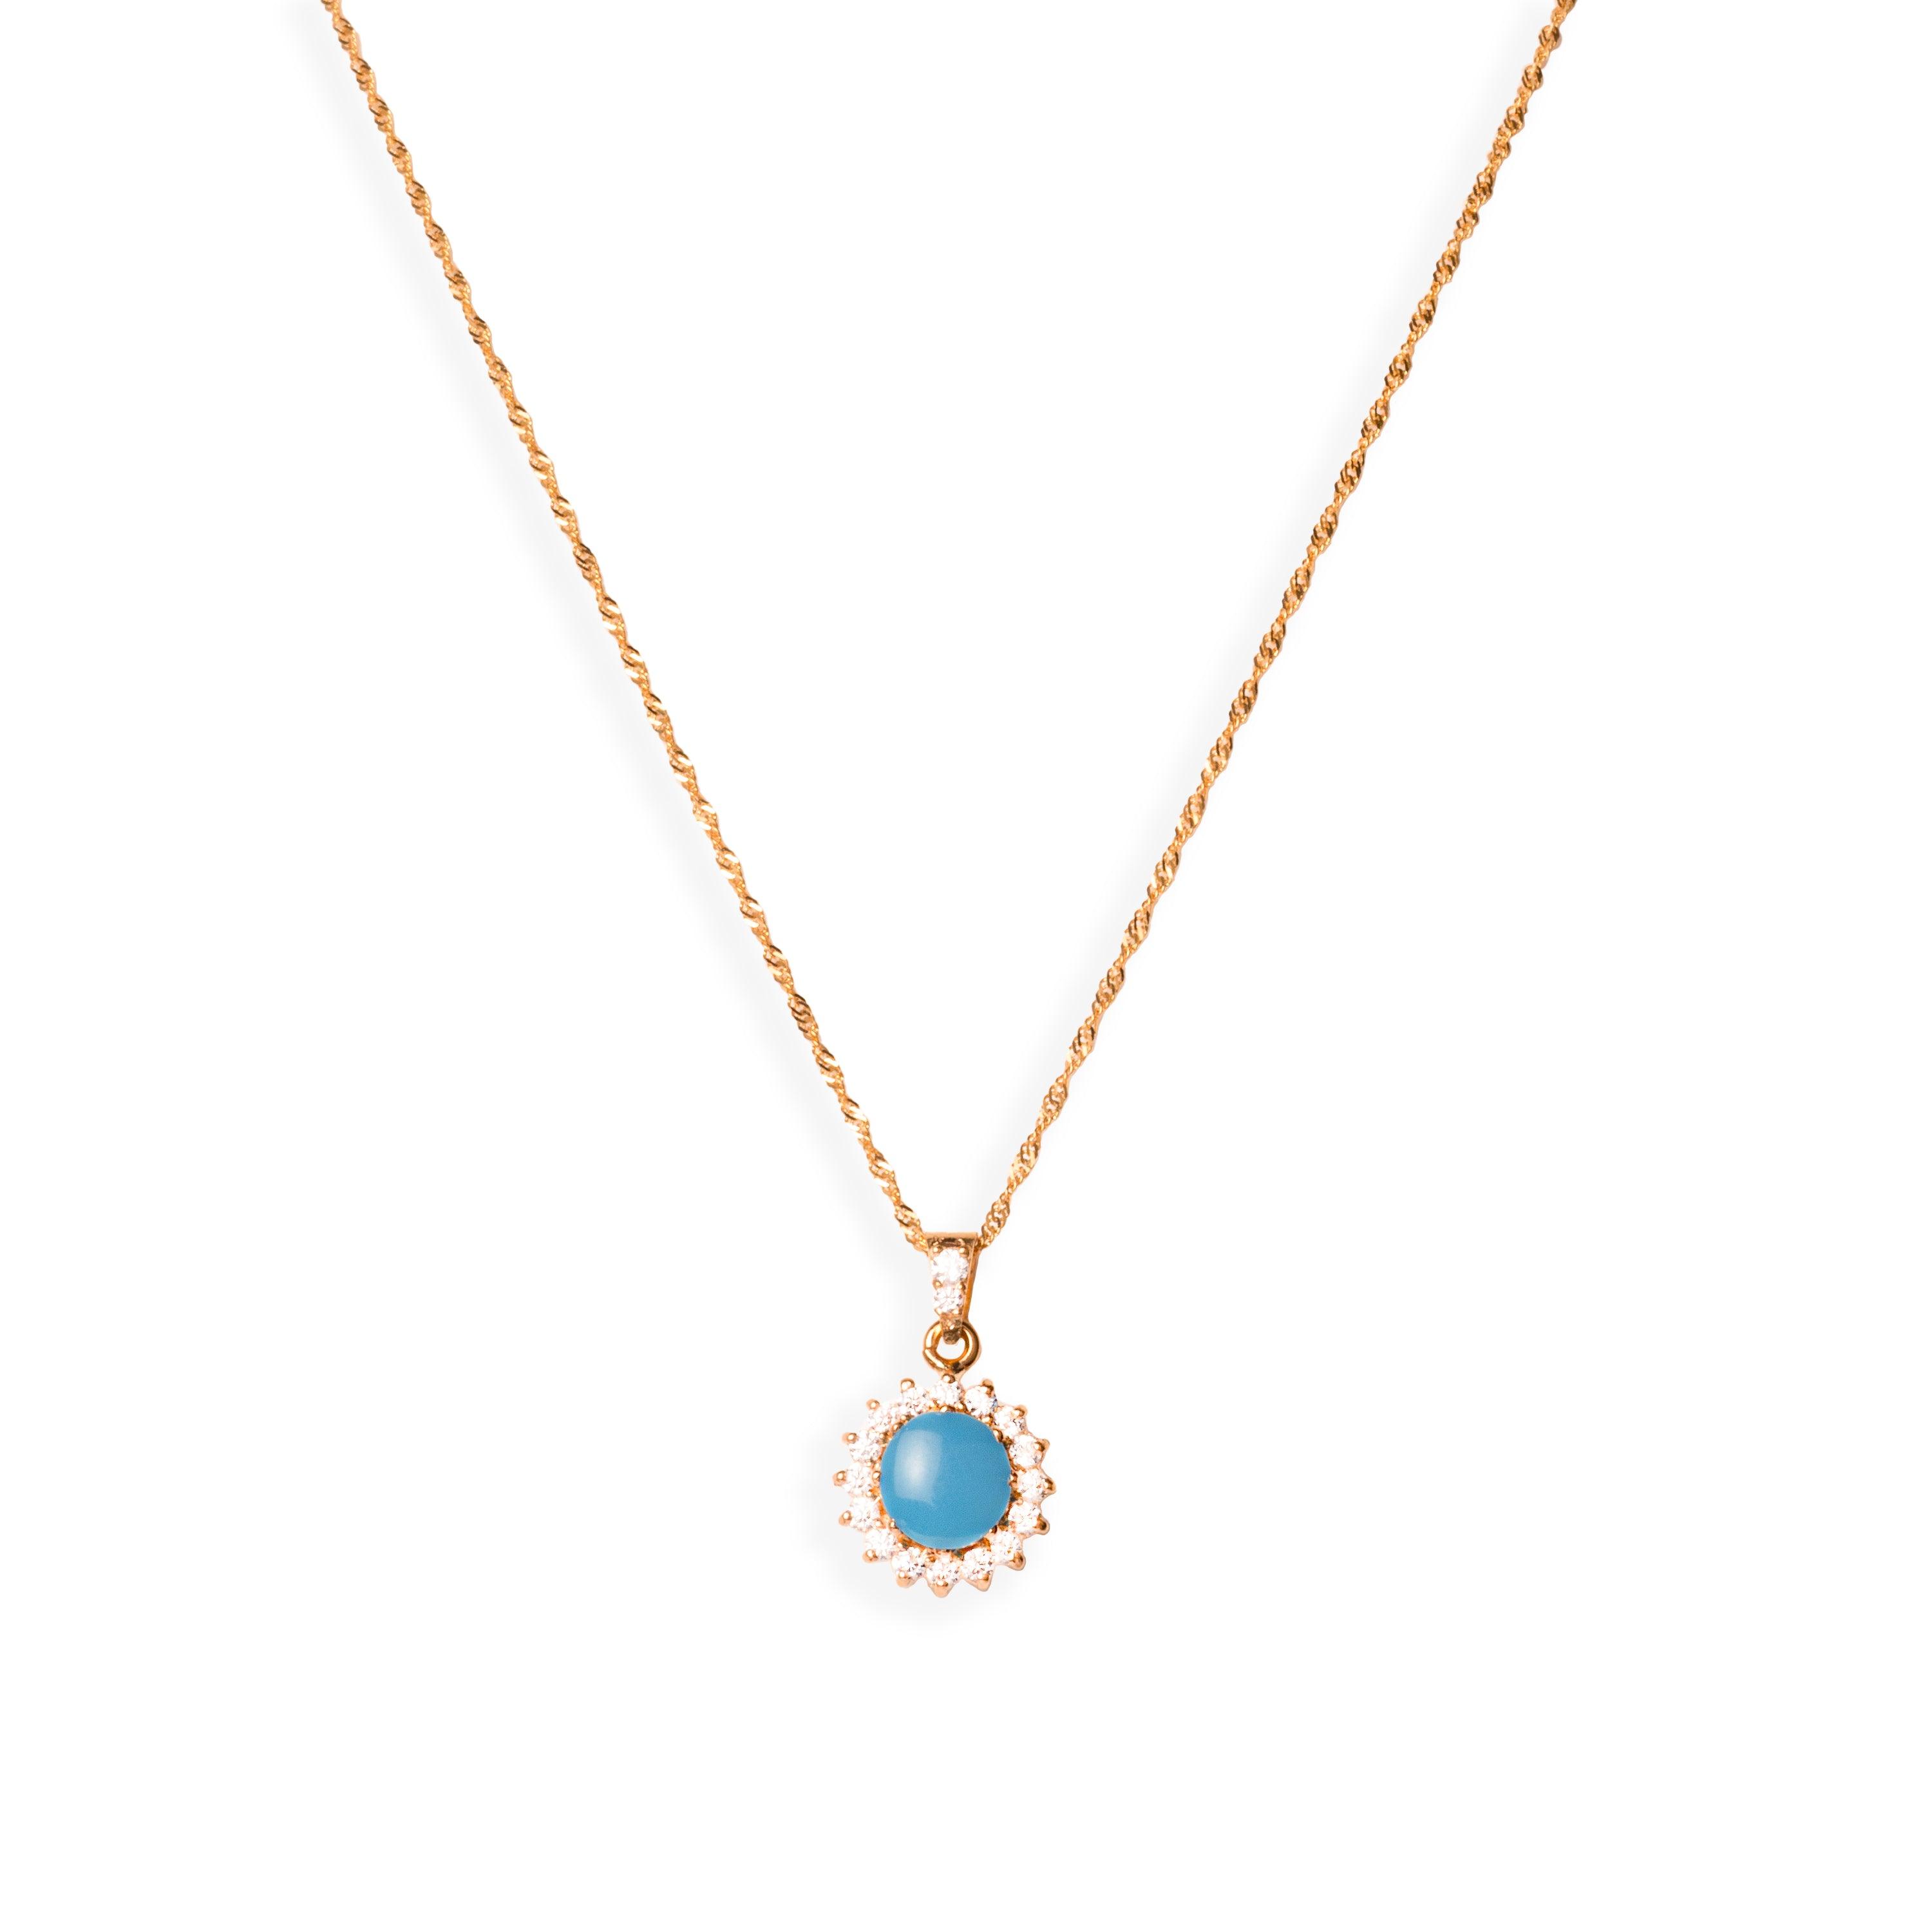 22ct Gold Cubic Zirconia and Turquoise Chain, Pendant and Earrings Set (8.6g) C-2821-16 P-7302 E-7302 - Minar Jewellers